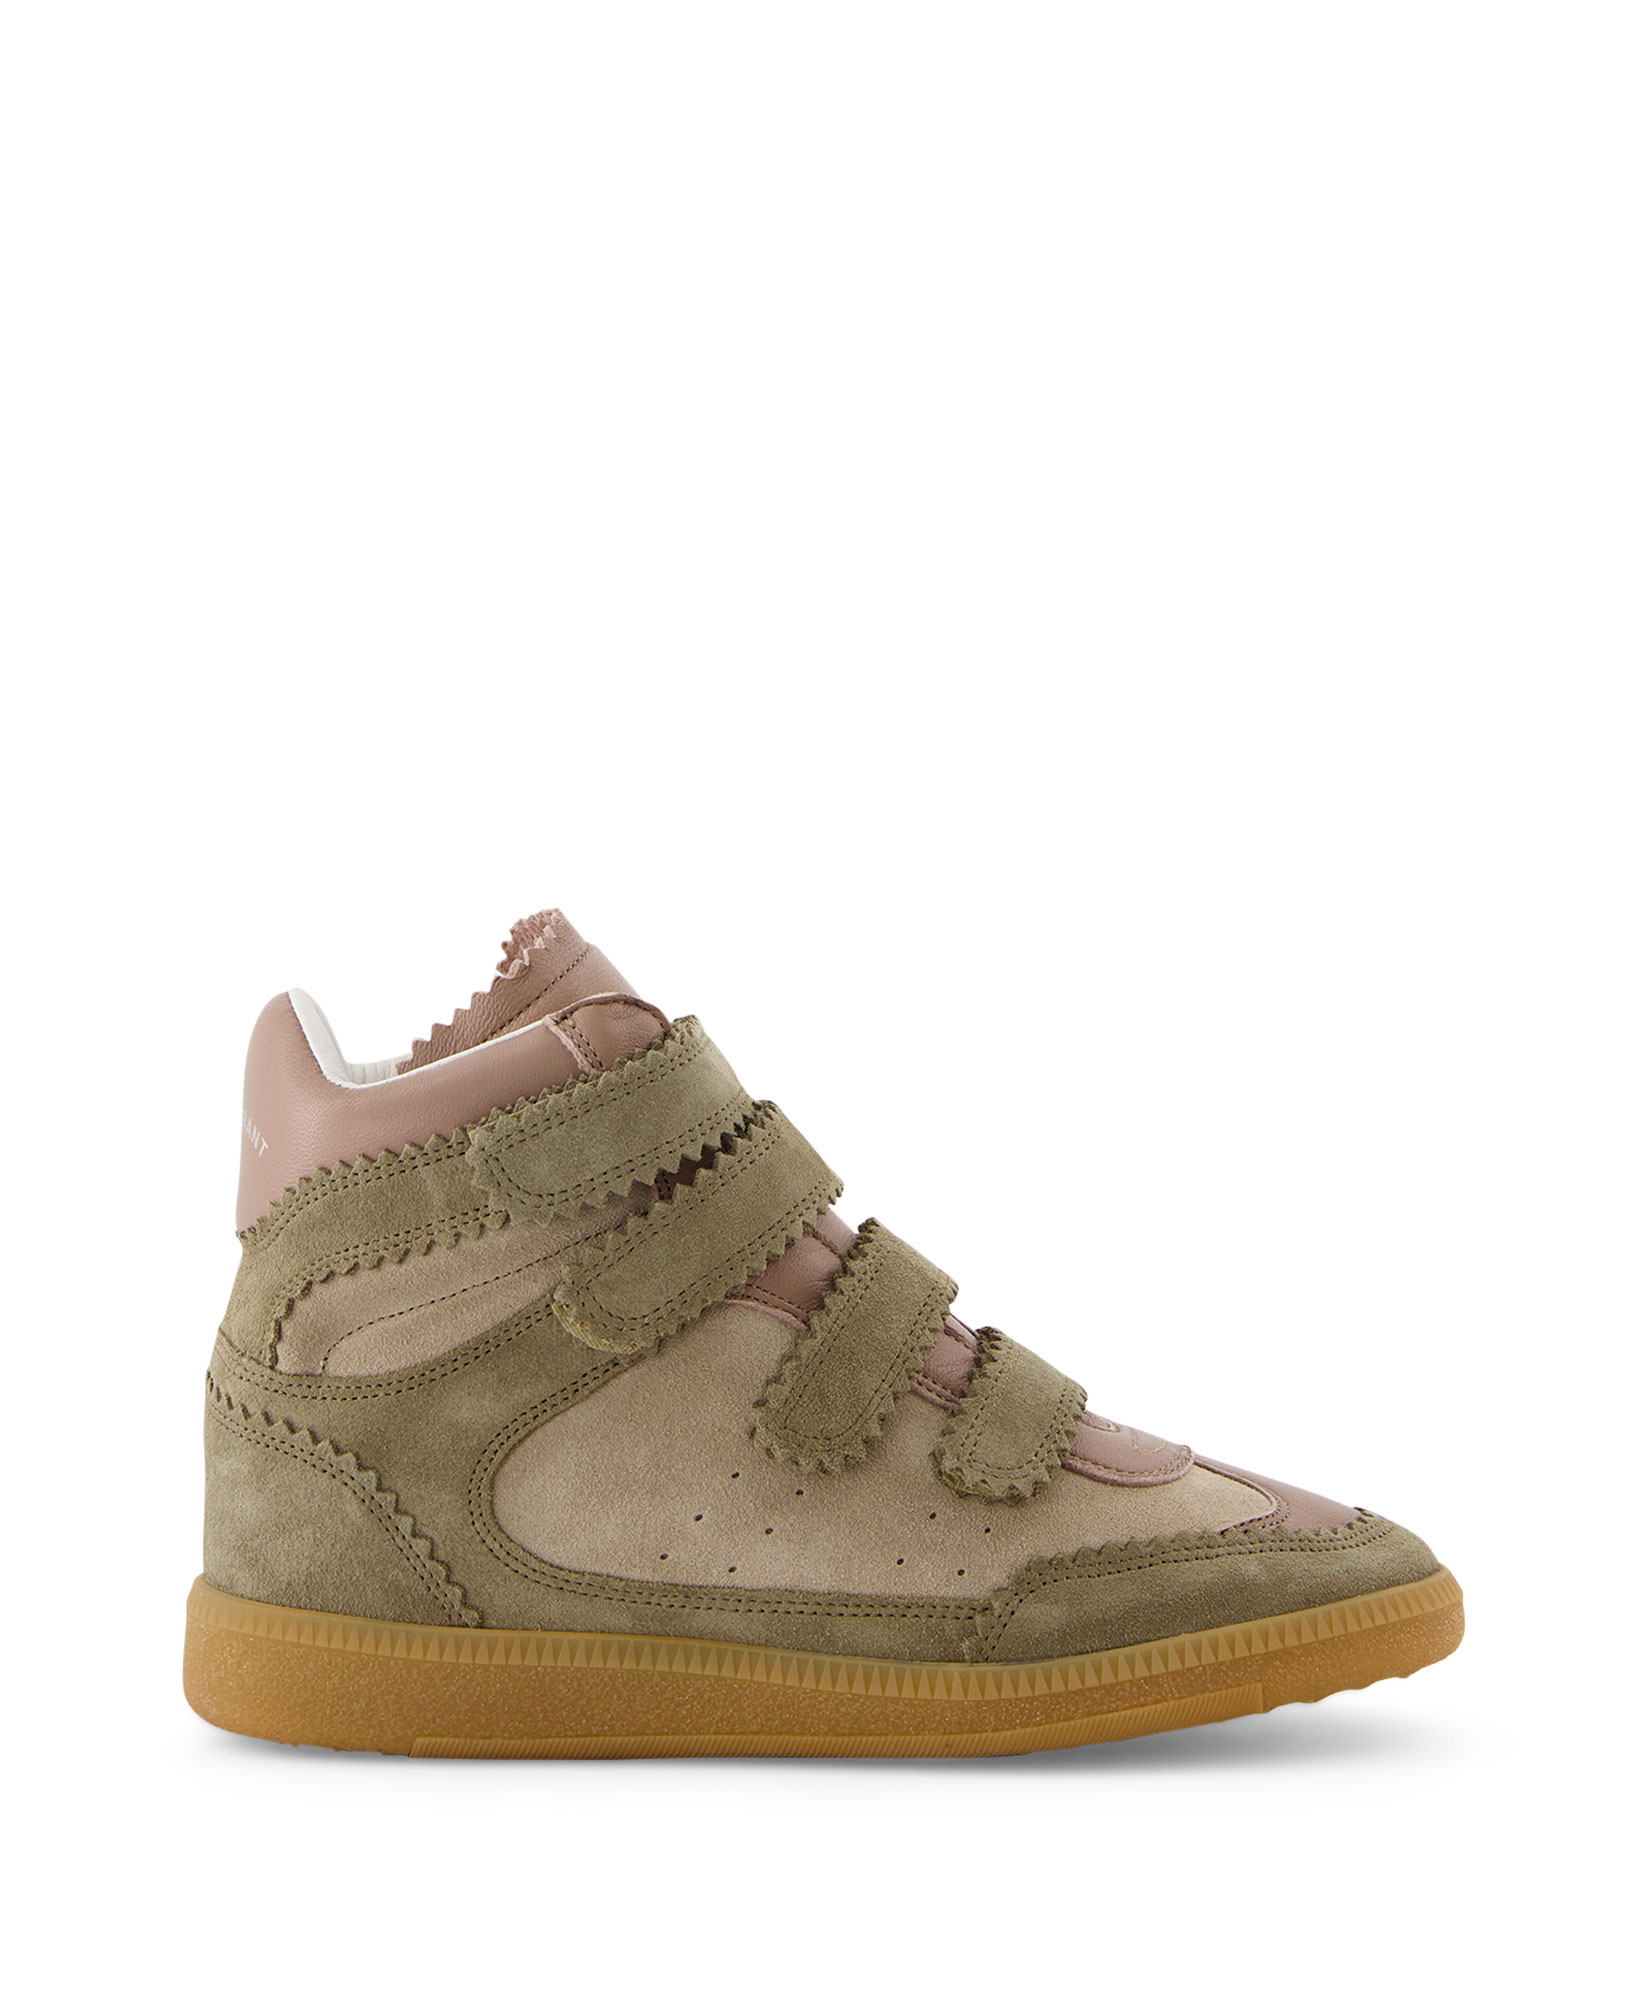 Isabel Marant Sneaker Bilsy Taupe